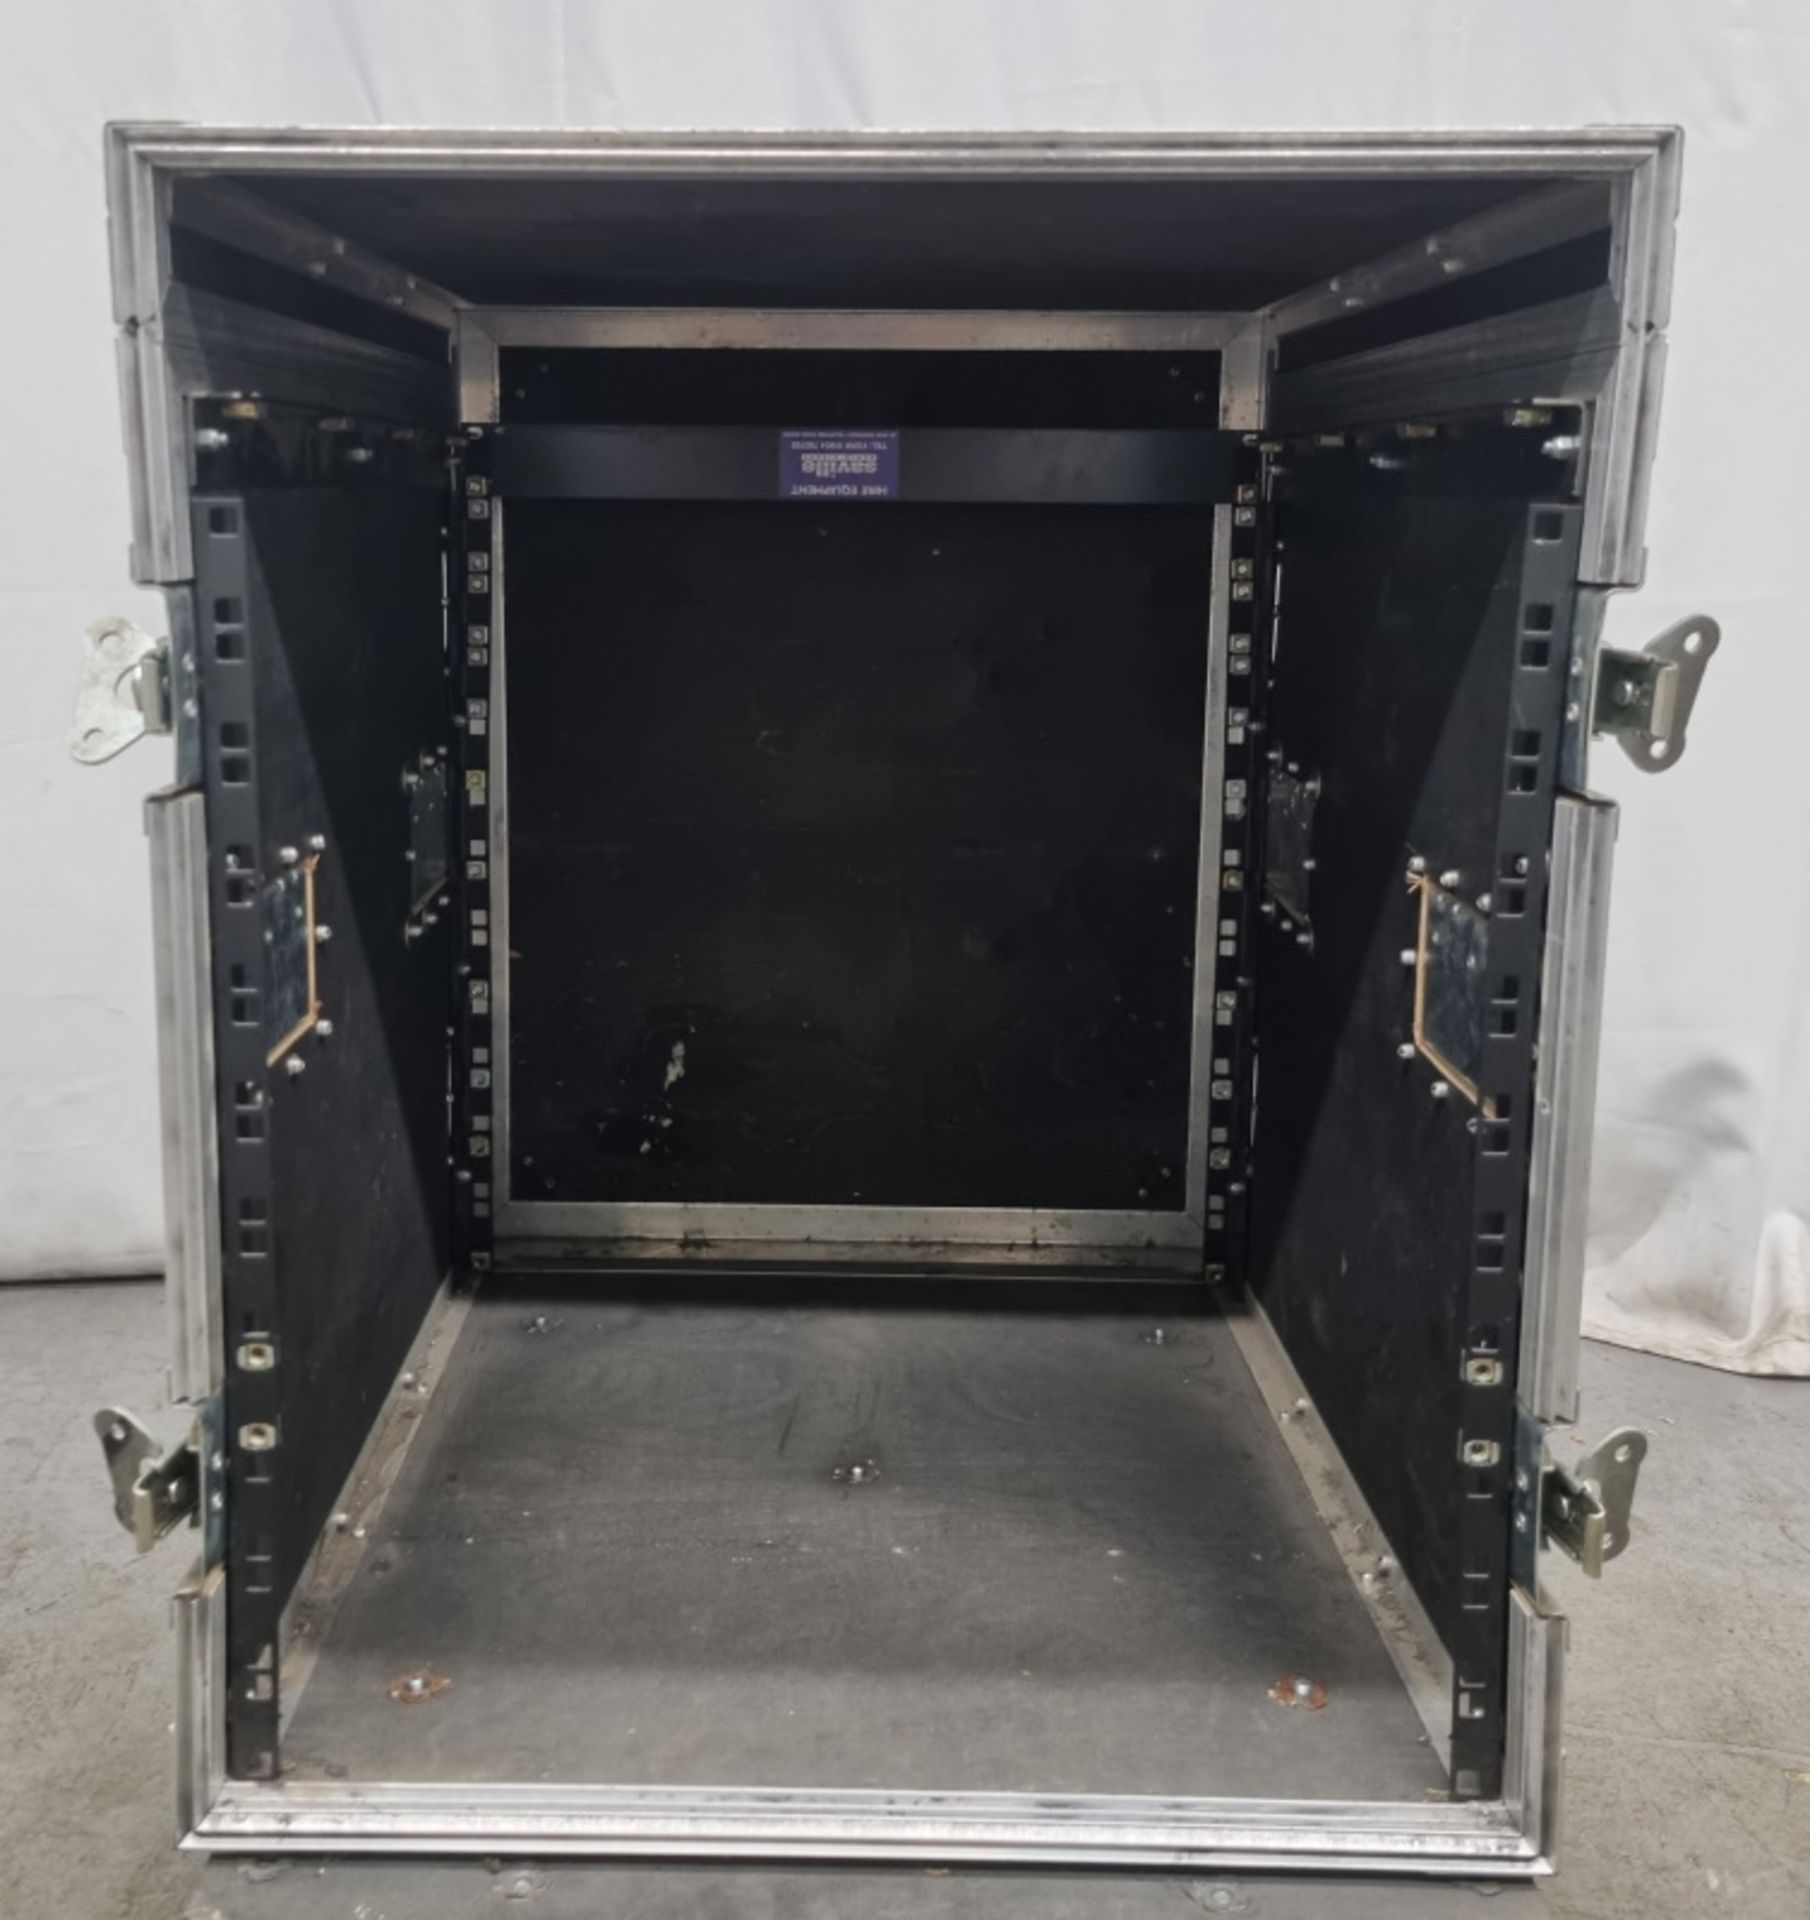 Empty Wheeled Flight case with internal rack - Dimensions L51.5 x W59 x H78 (including wheels) - Image 5 of 5